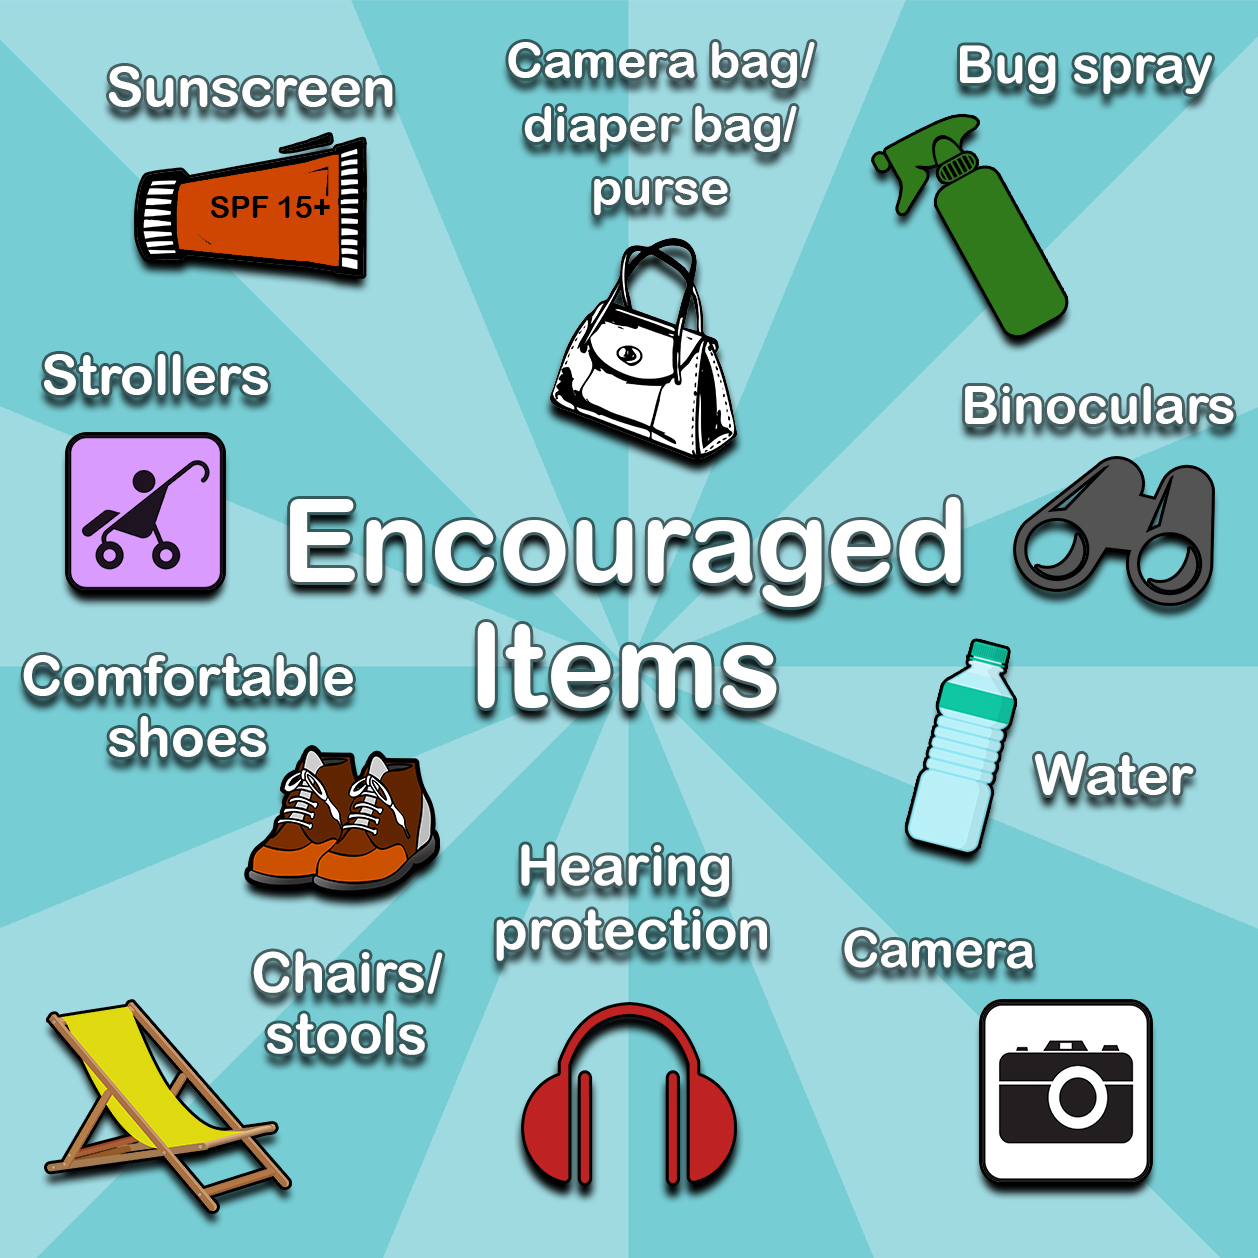 Encouraged items to bring